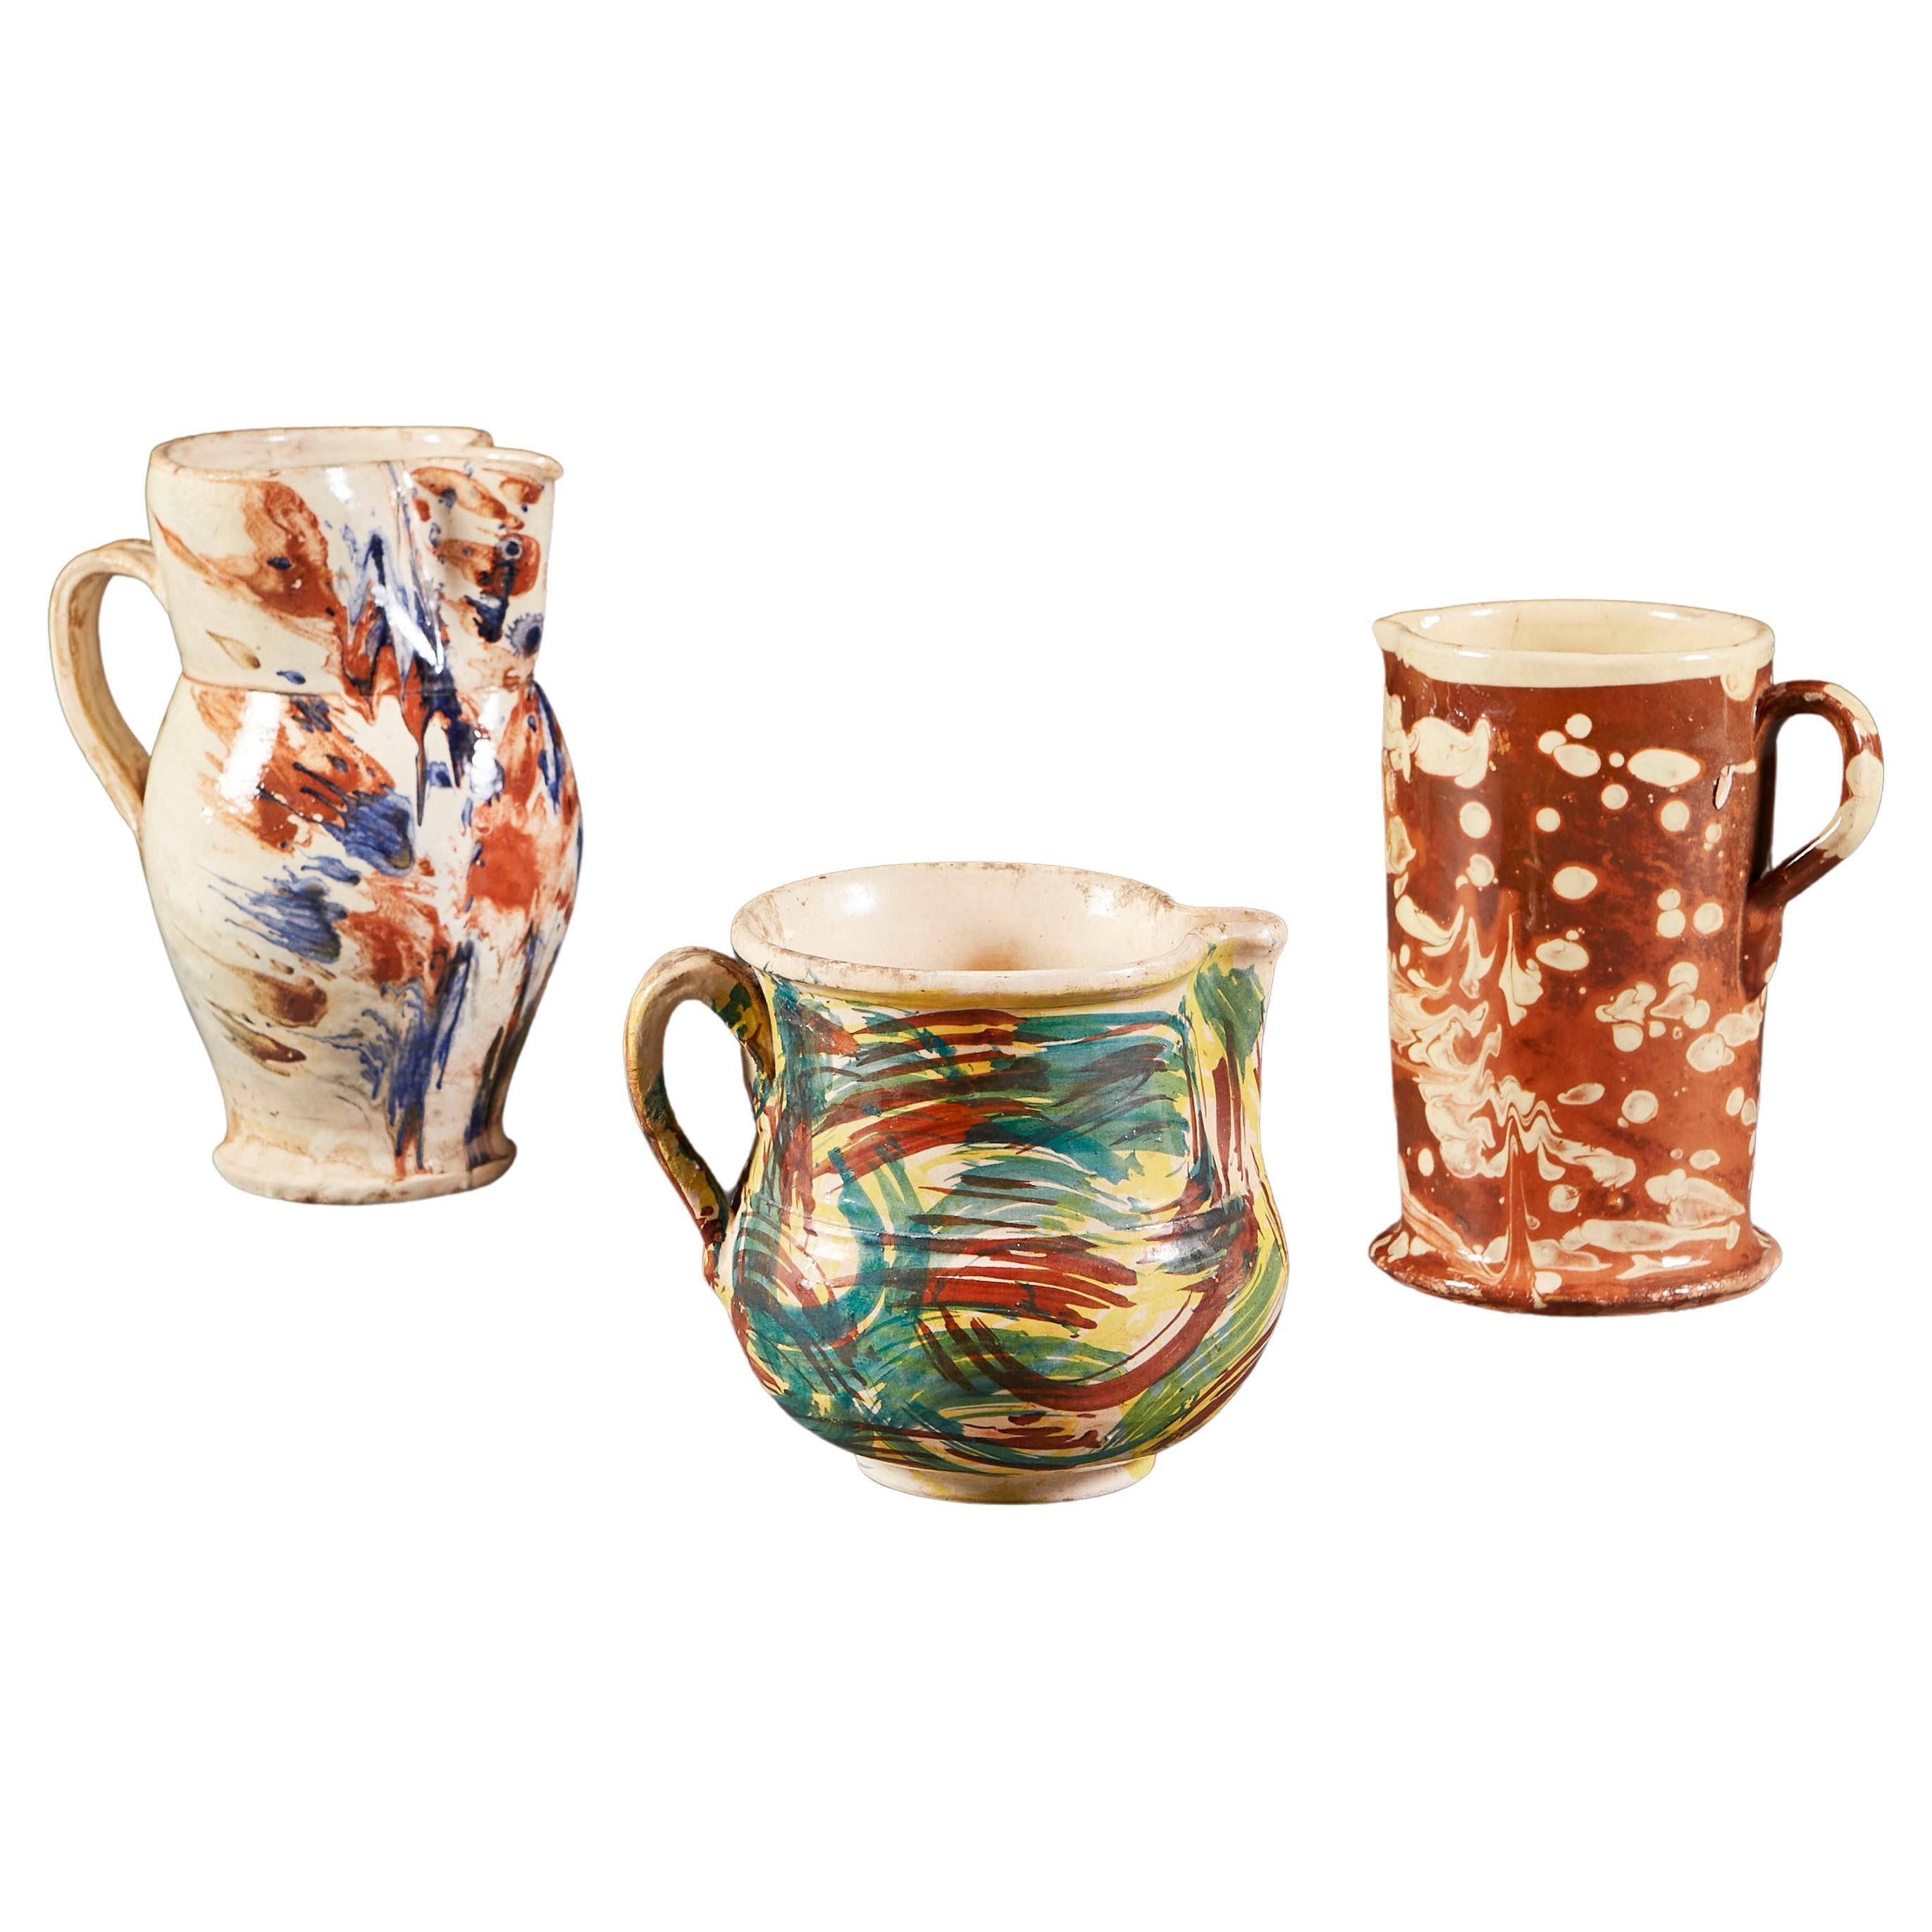 A group of three mid nineteenth century Italian jugs. One with sienna and cream marbleised glaze, two with polychrome, abstract designs hand painted with loose, expressive brushstrokes prior to glazing.

  
 